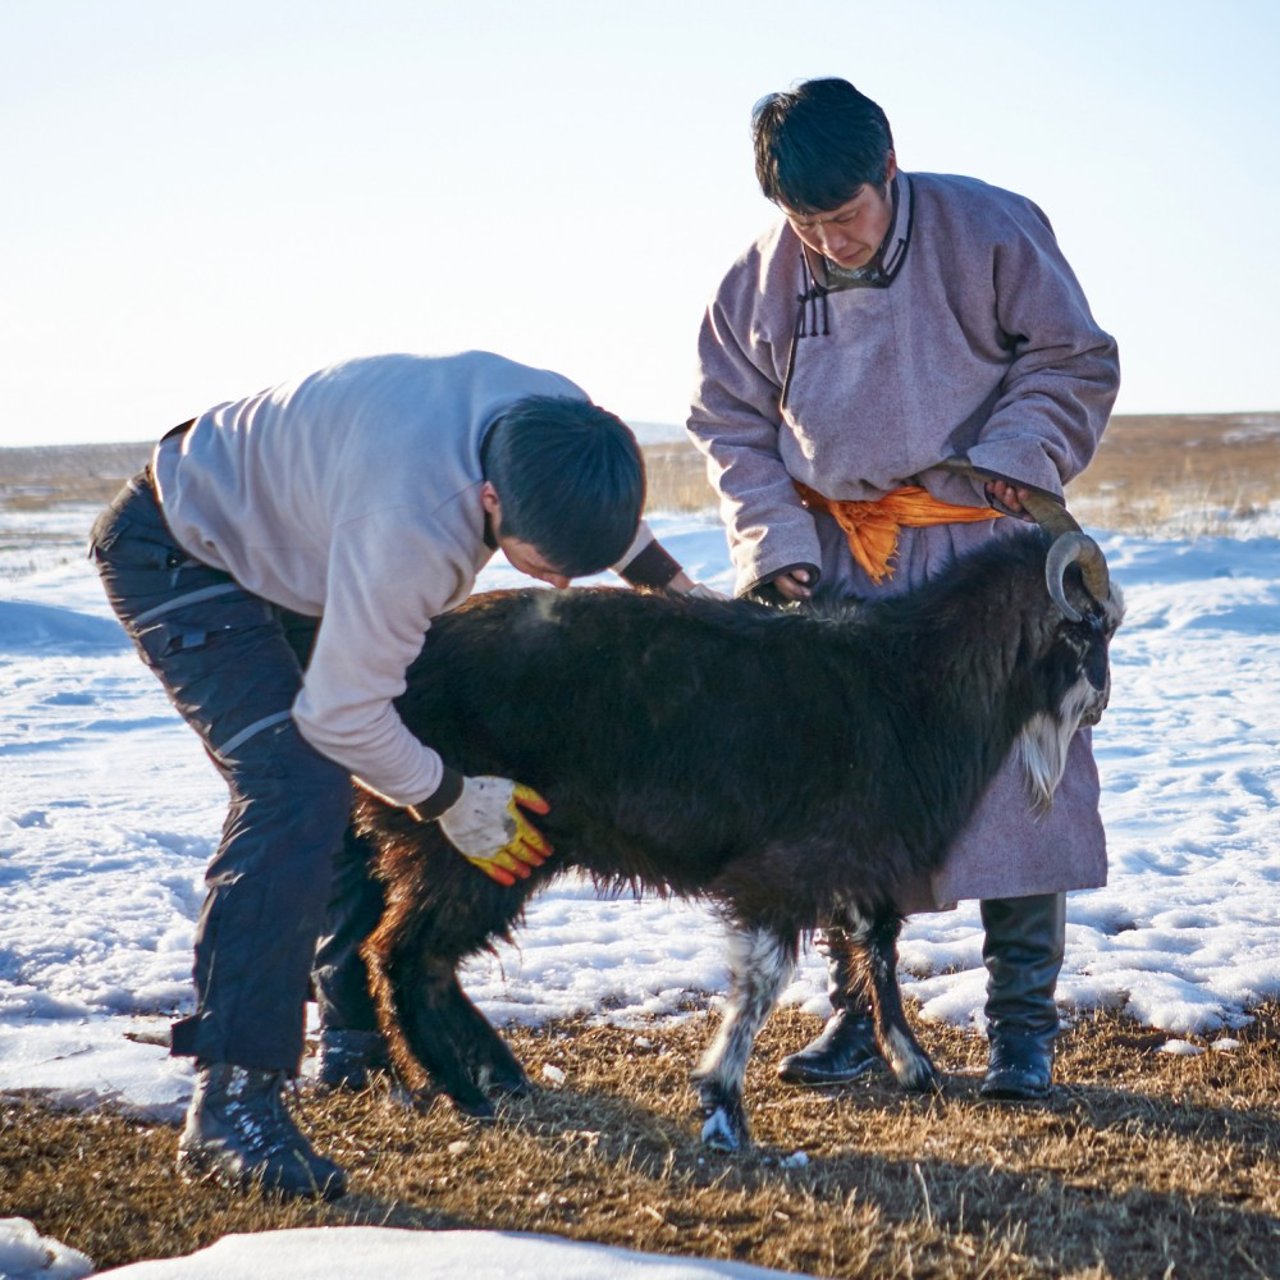 mongolian_herders_and_a_goat_crop